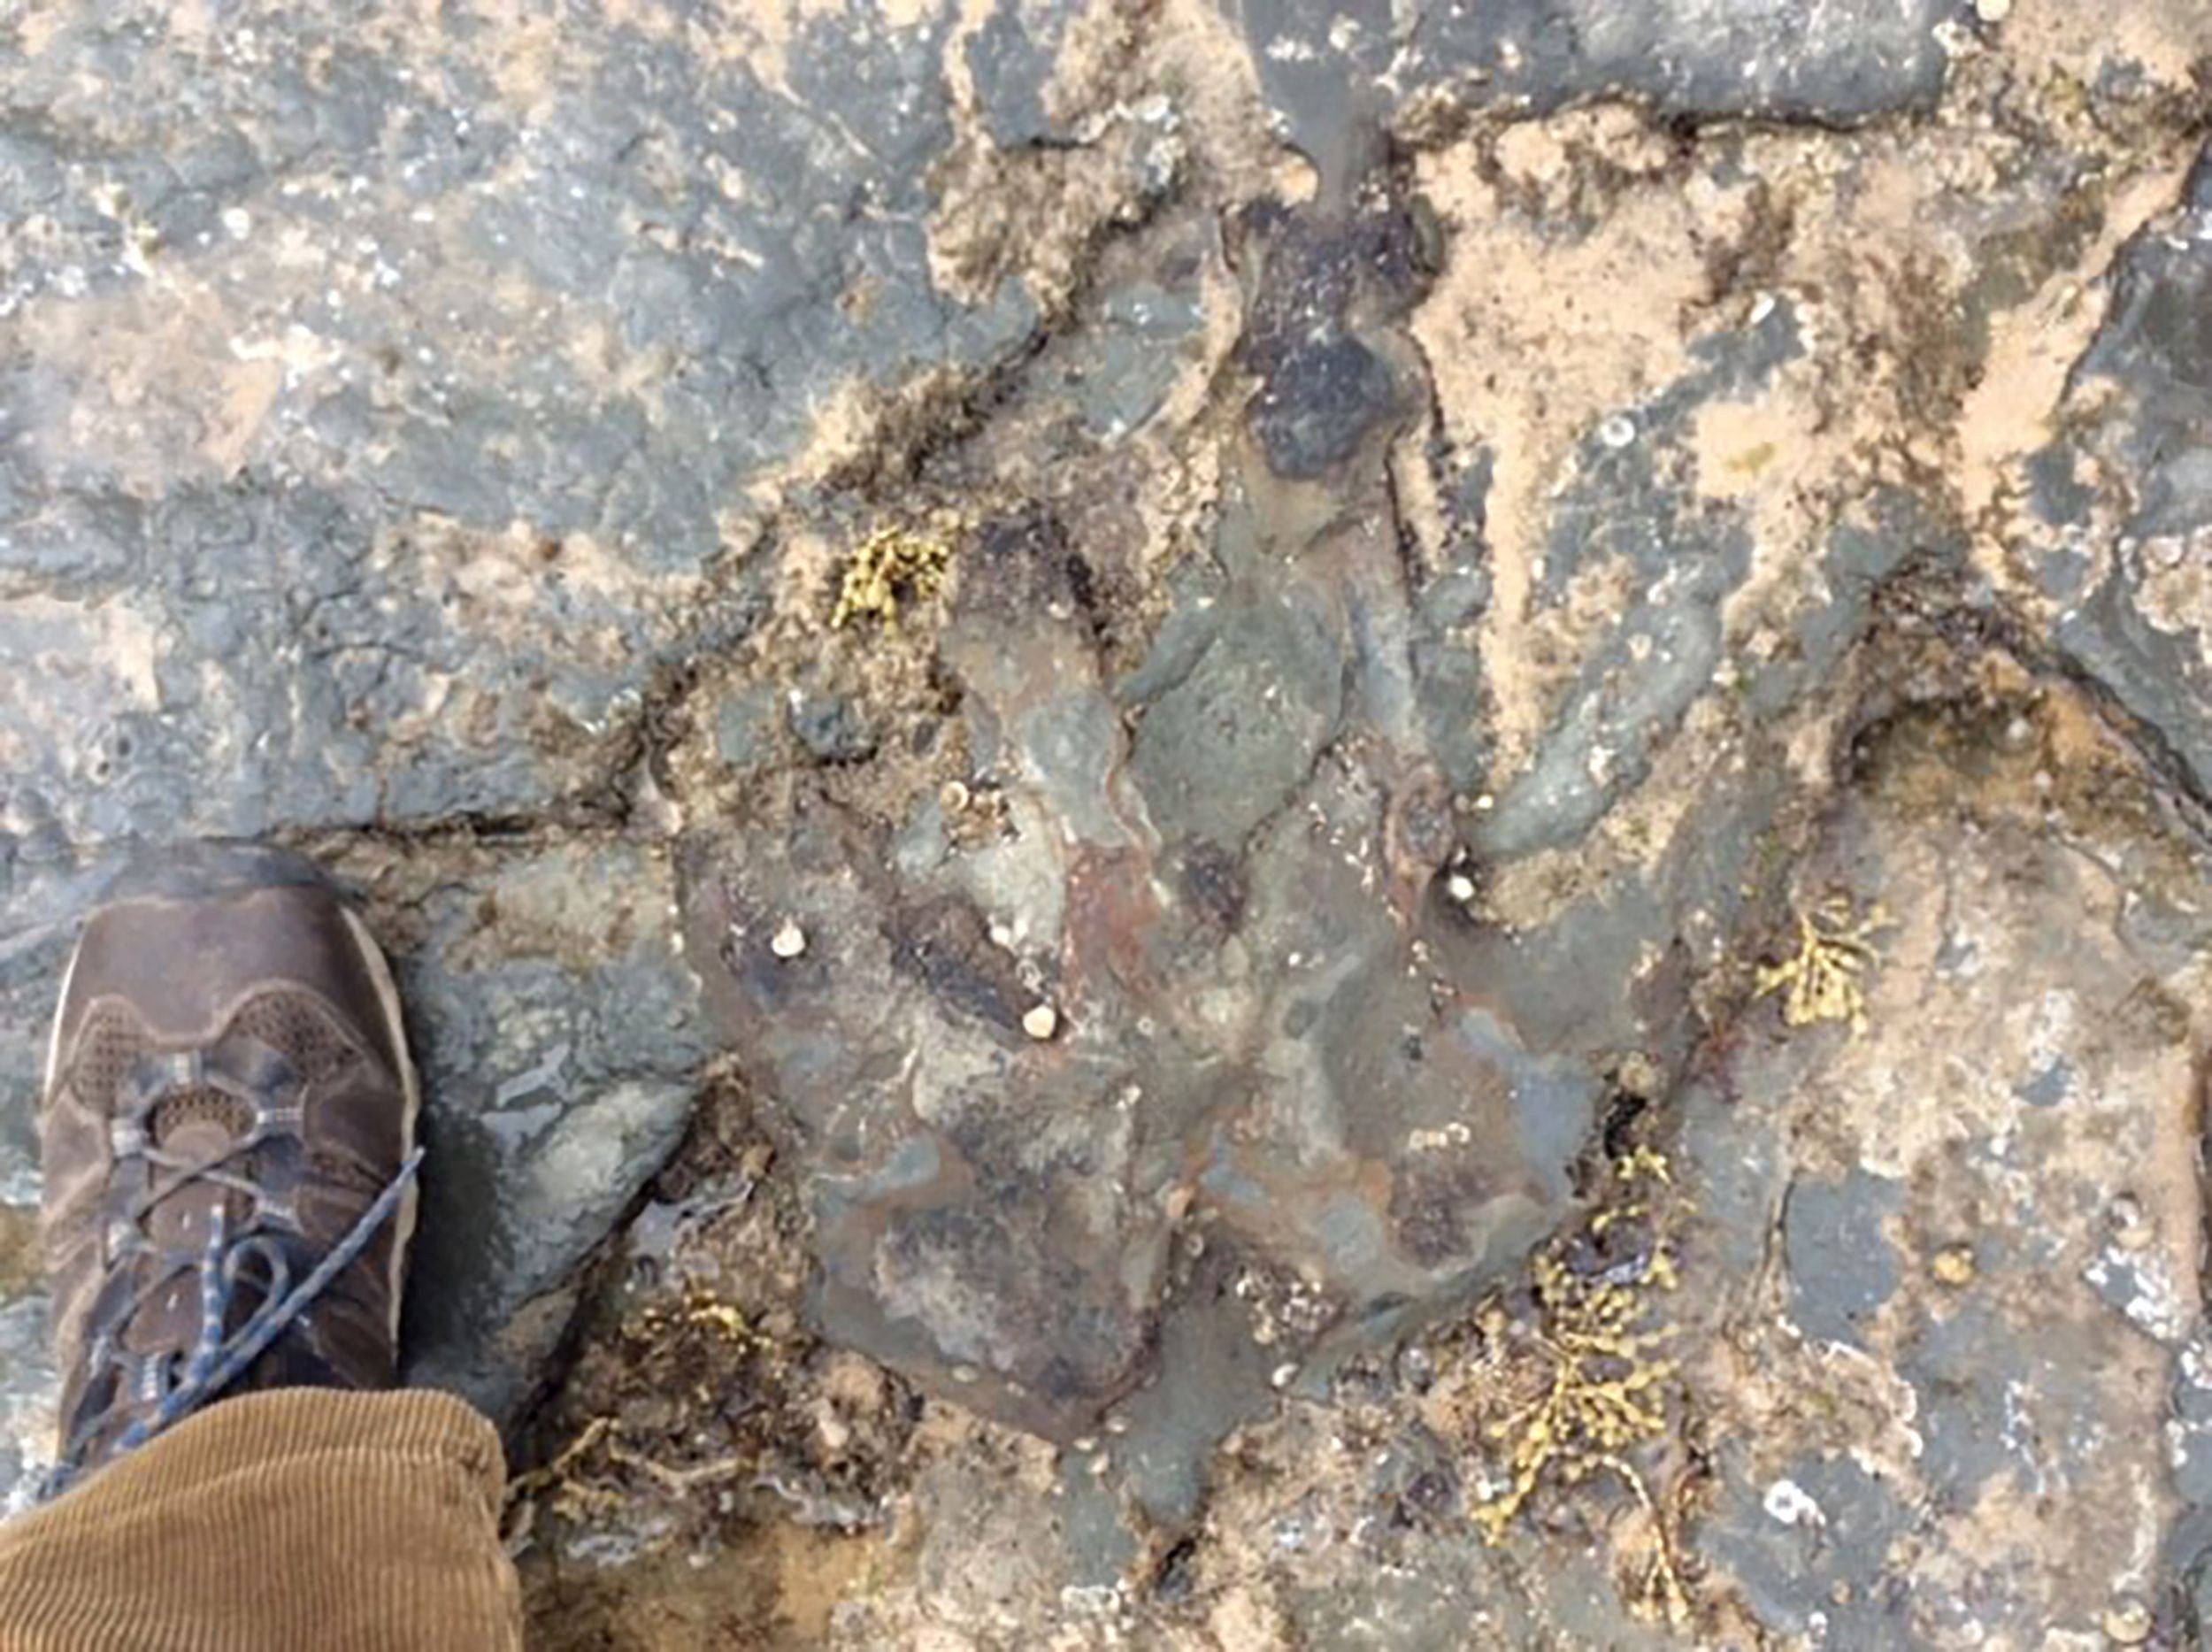 The dinosaur footprint after it was damaged by vandals at Flat Rocks. Photo: AFP